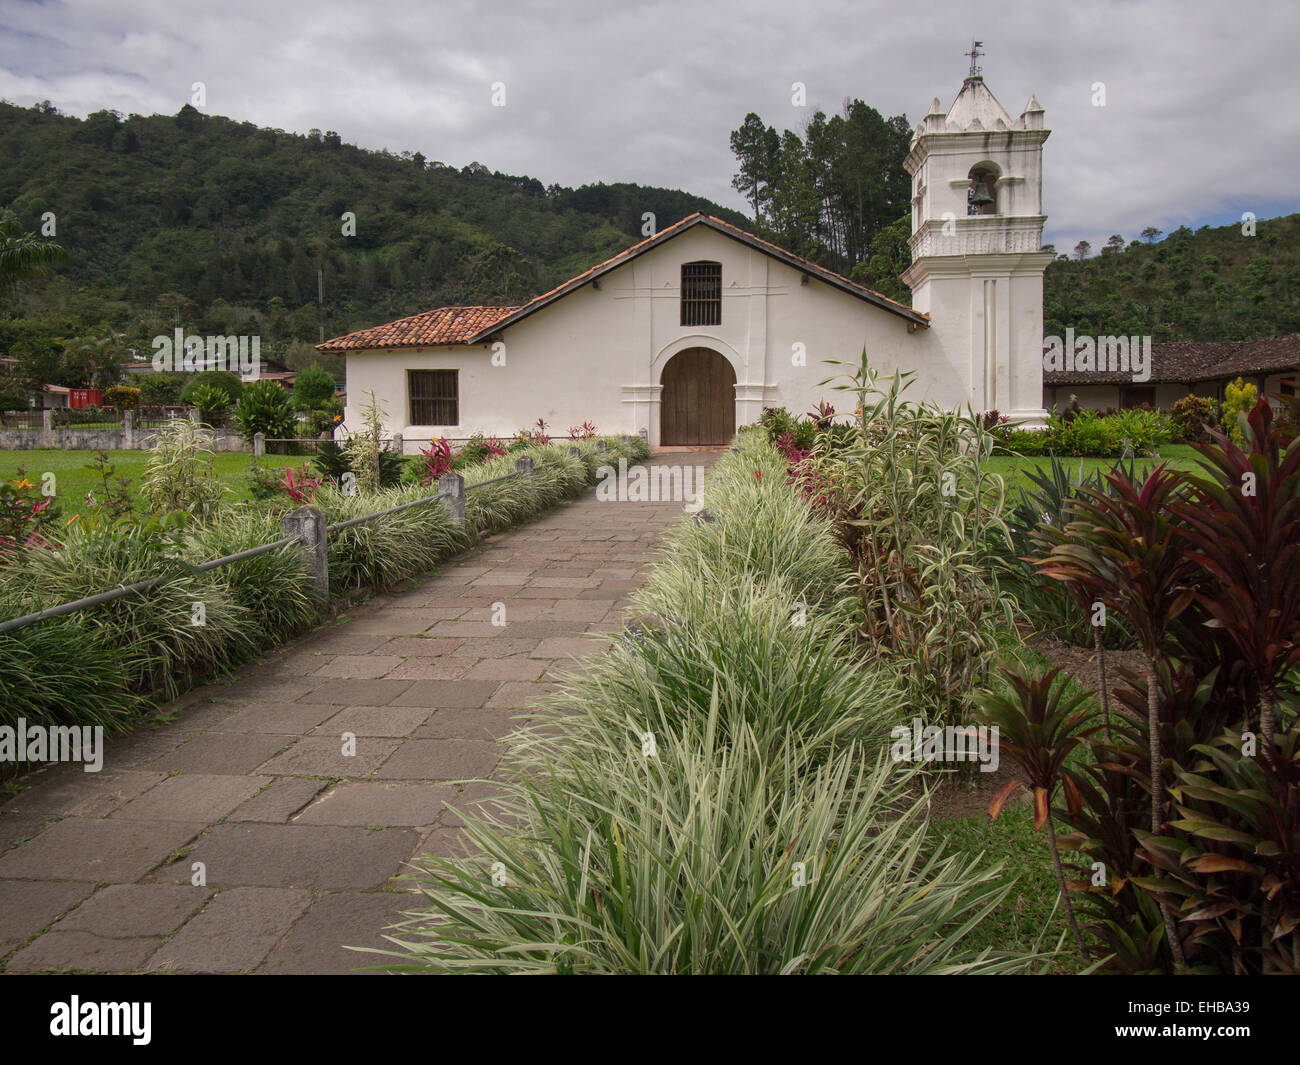 This church (Iglesia de San José Orosi) built in 1743 is the oldest religious site still in use in Costa Rica. Stock Photo